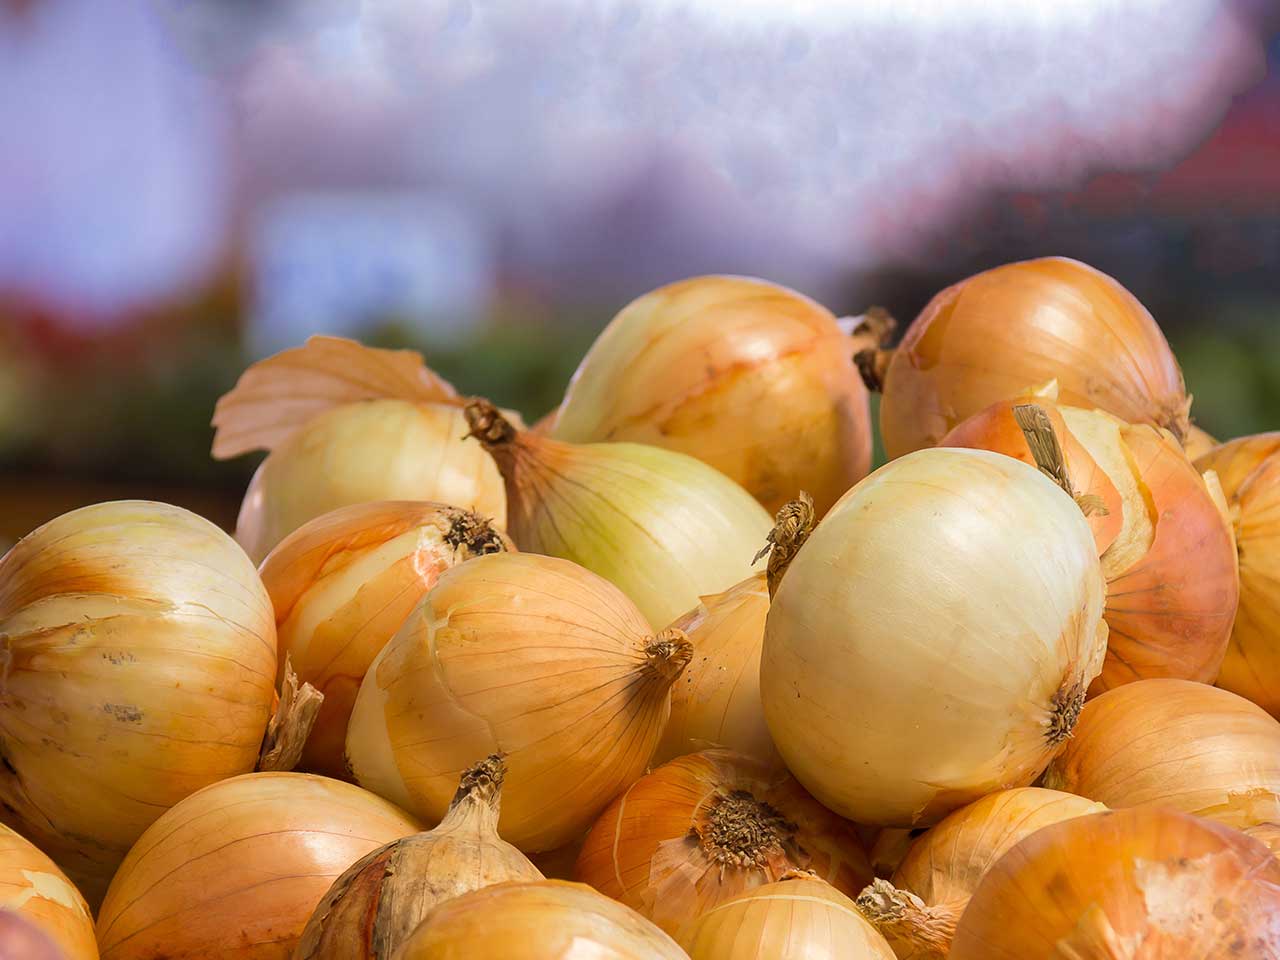 Onions on a market stall